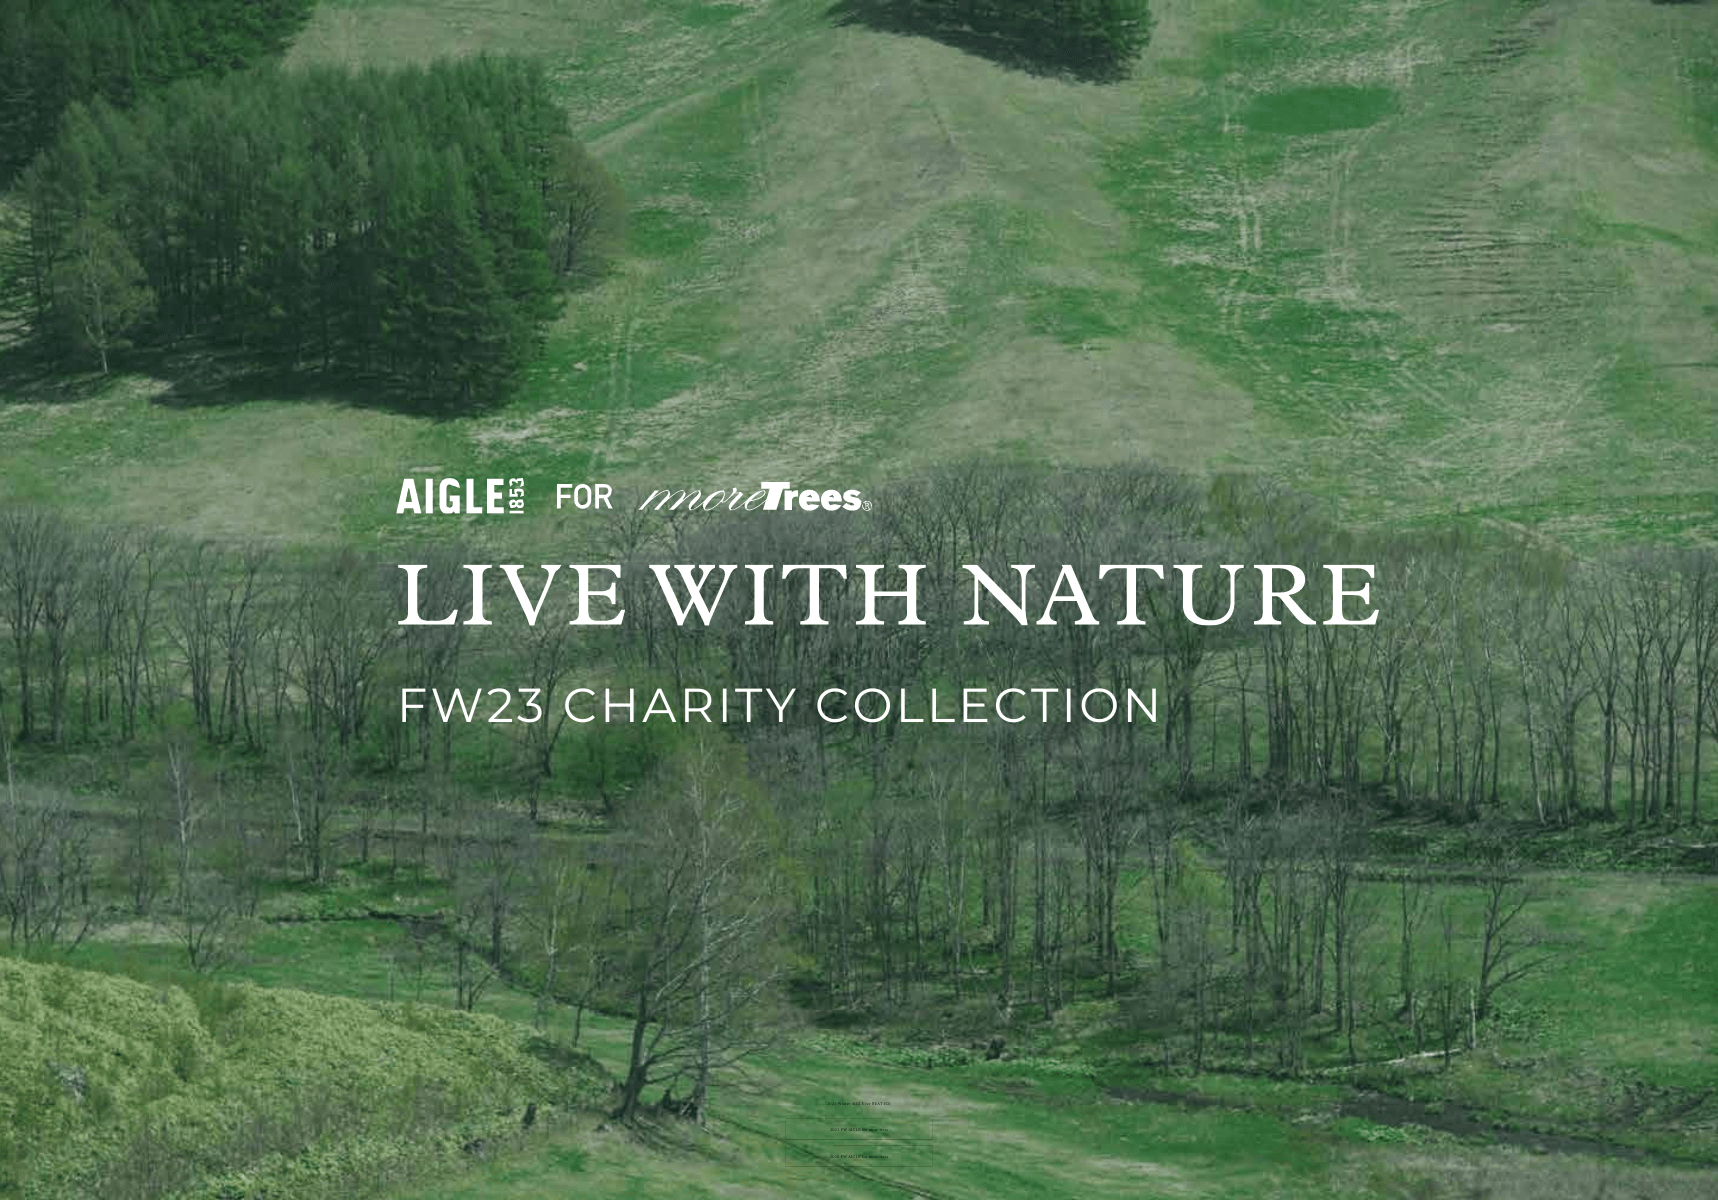 AIGLE for more trees | Live with Nature